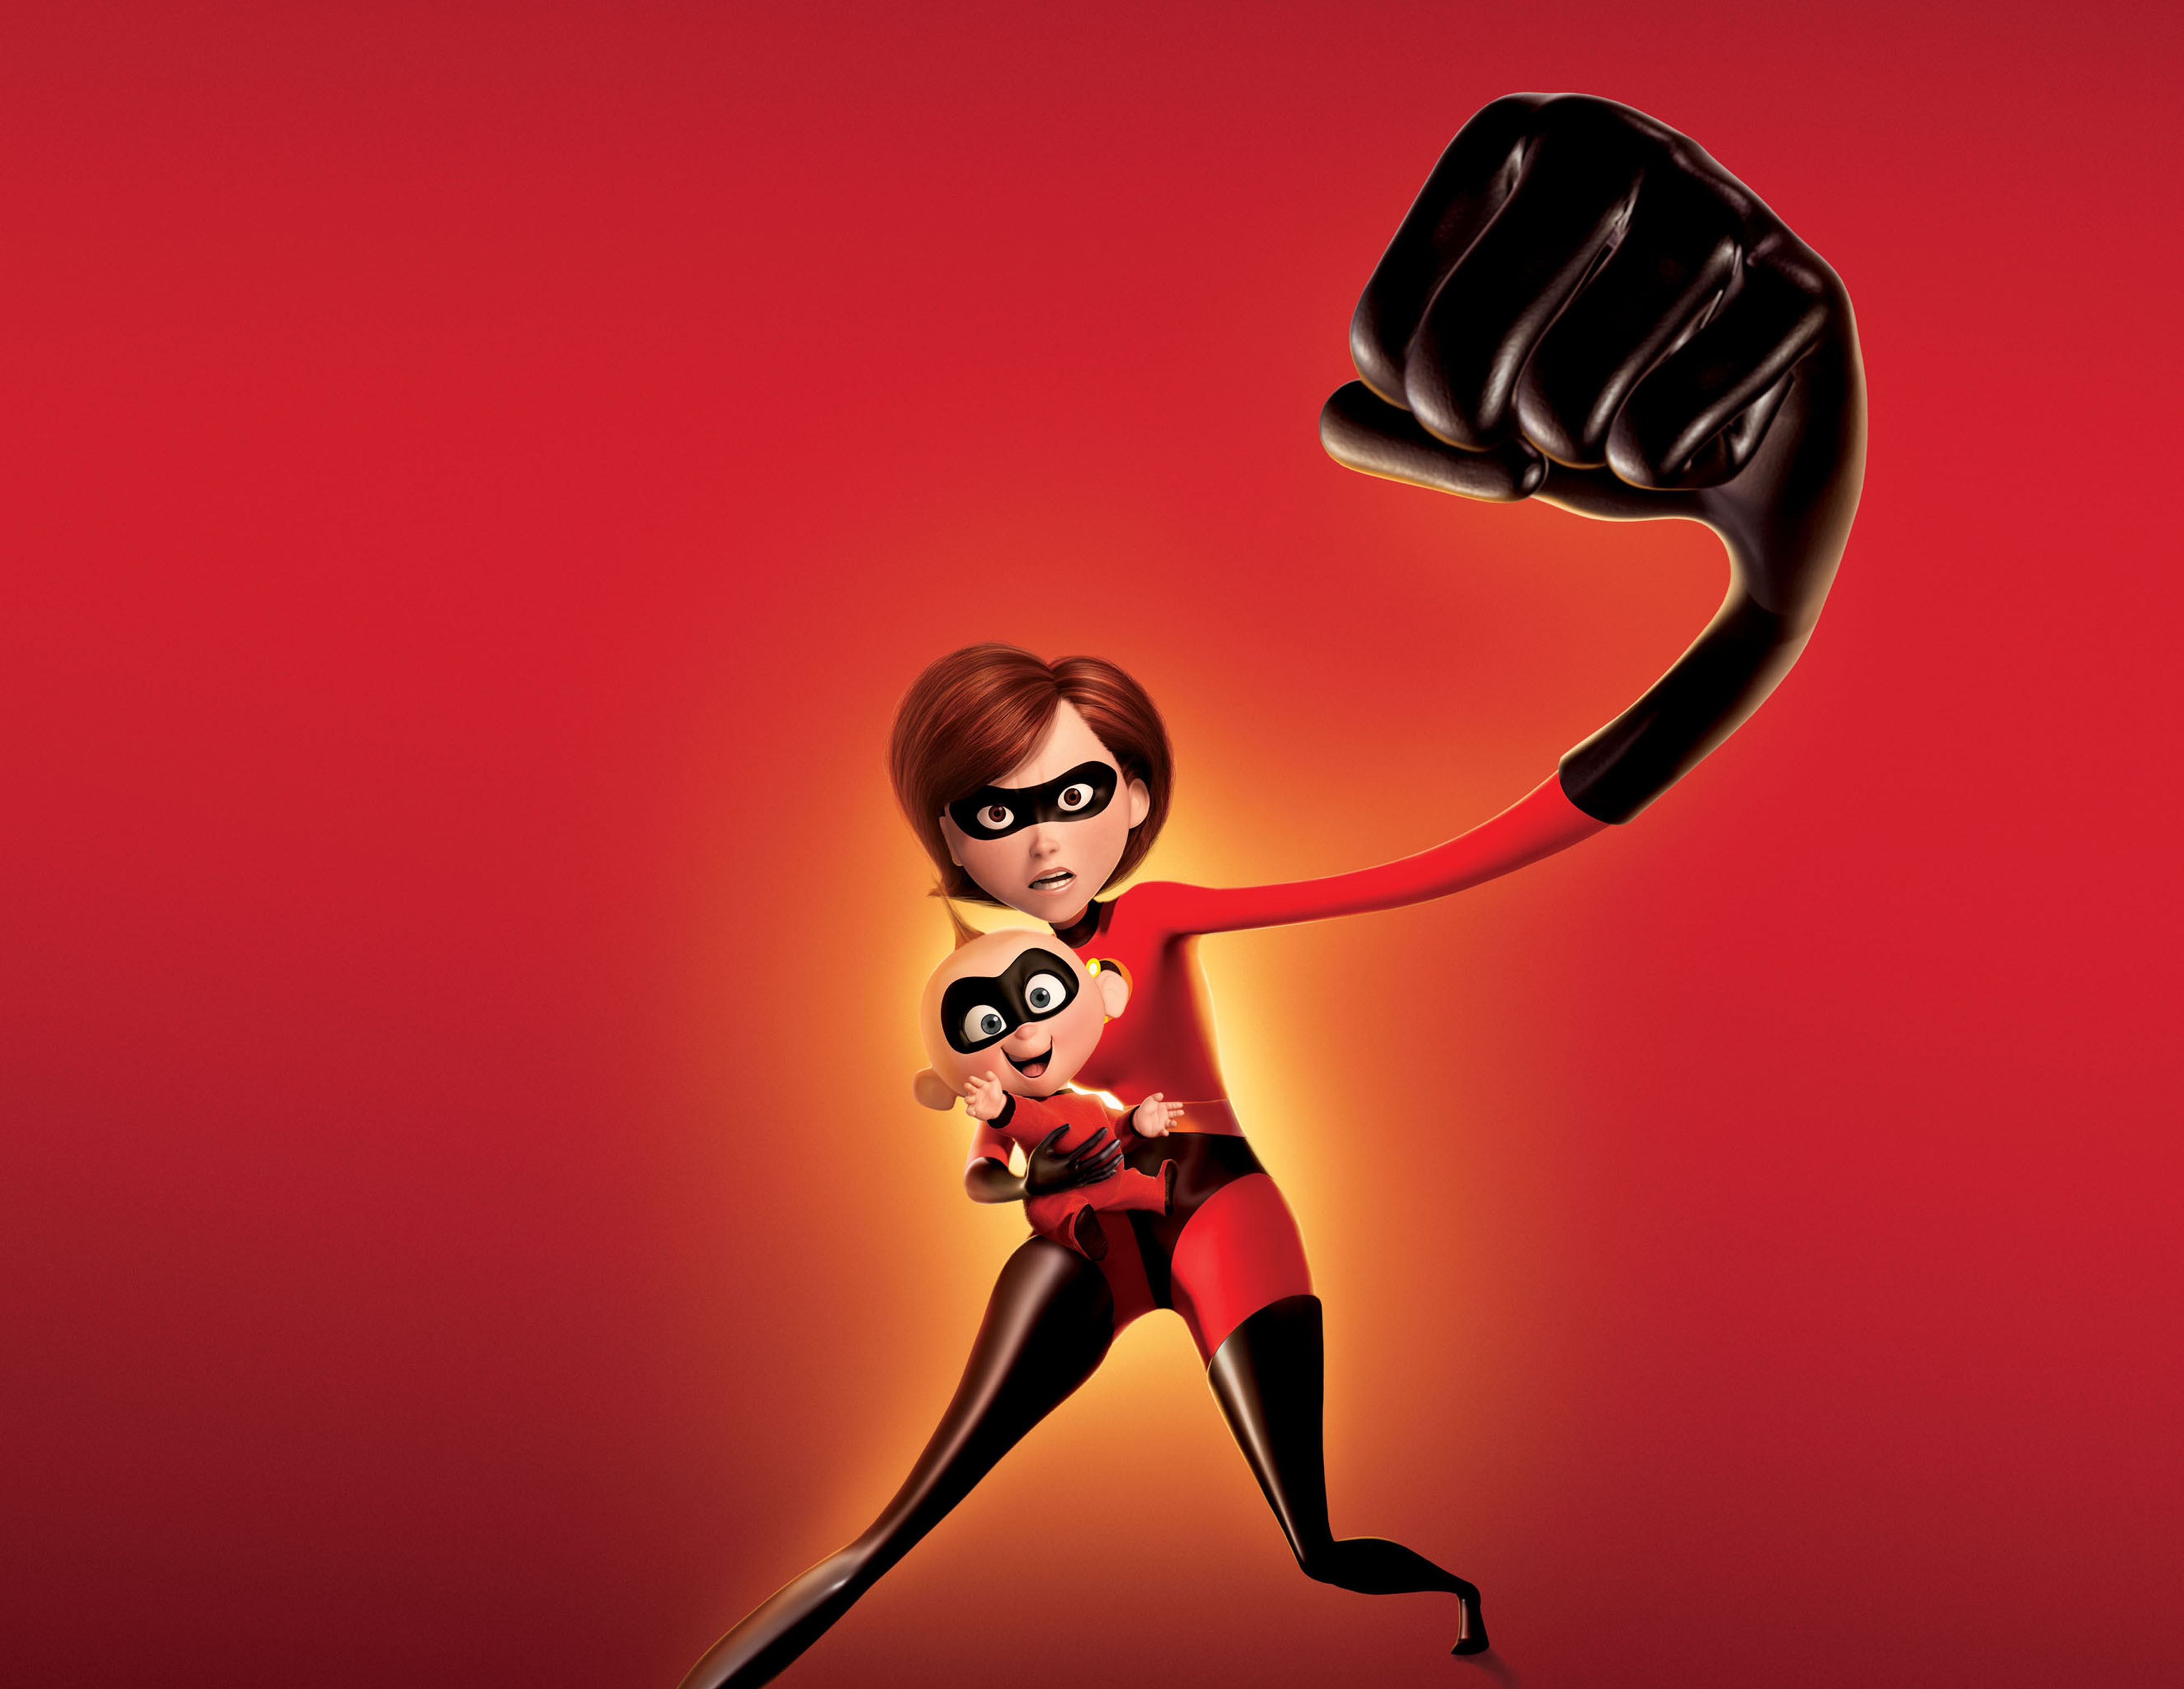 The Incredibles 2 Movie Poster Wallpapers